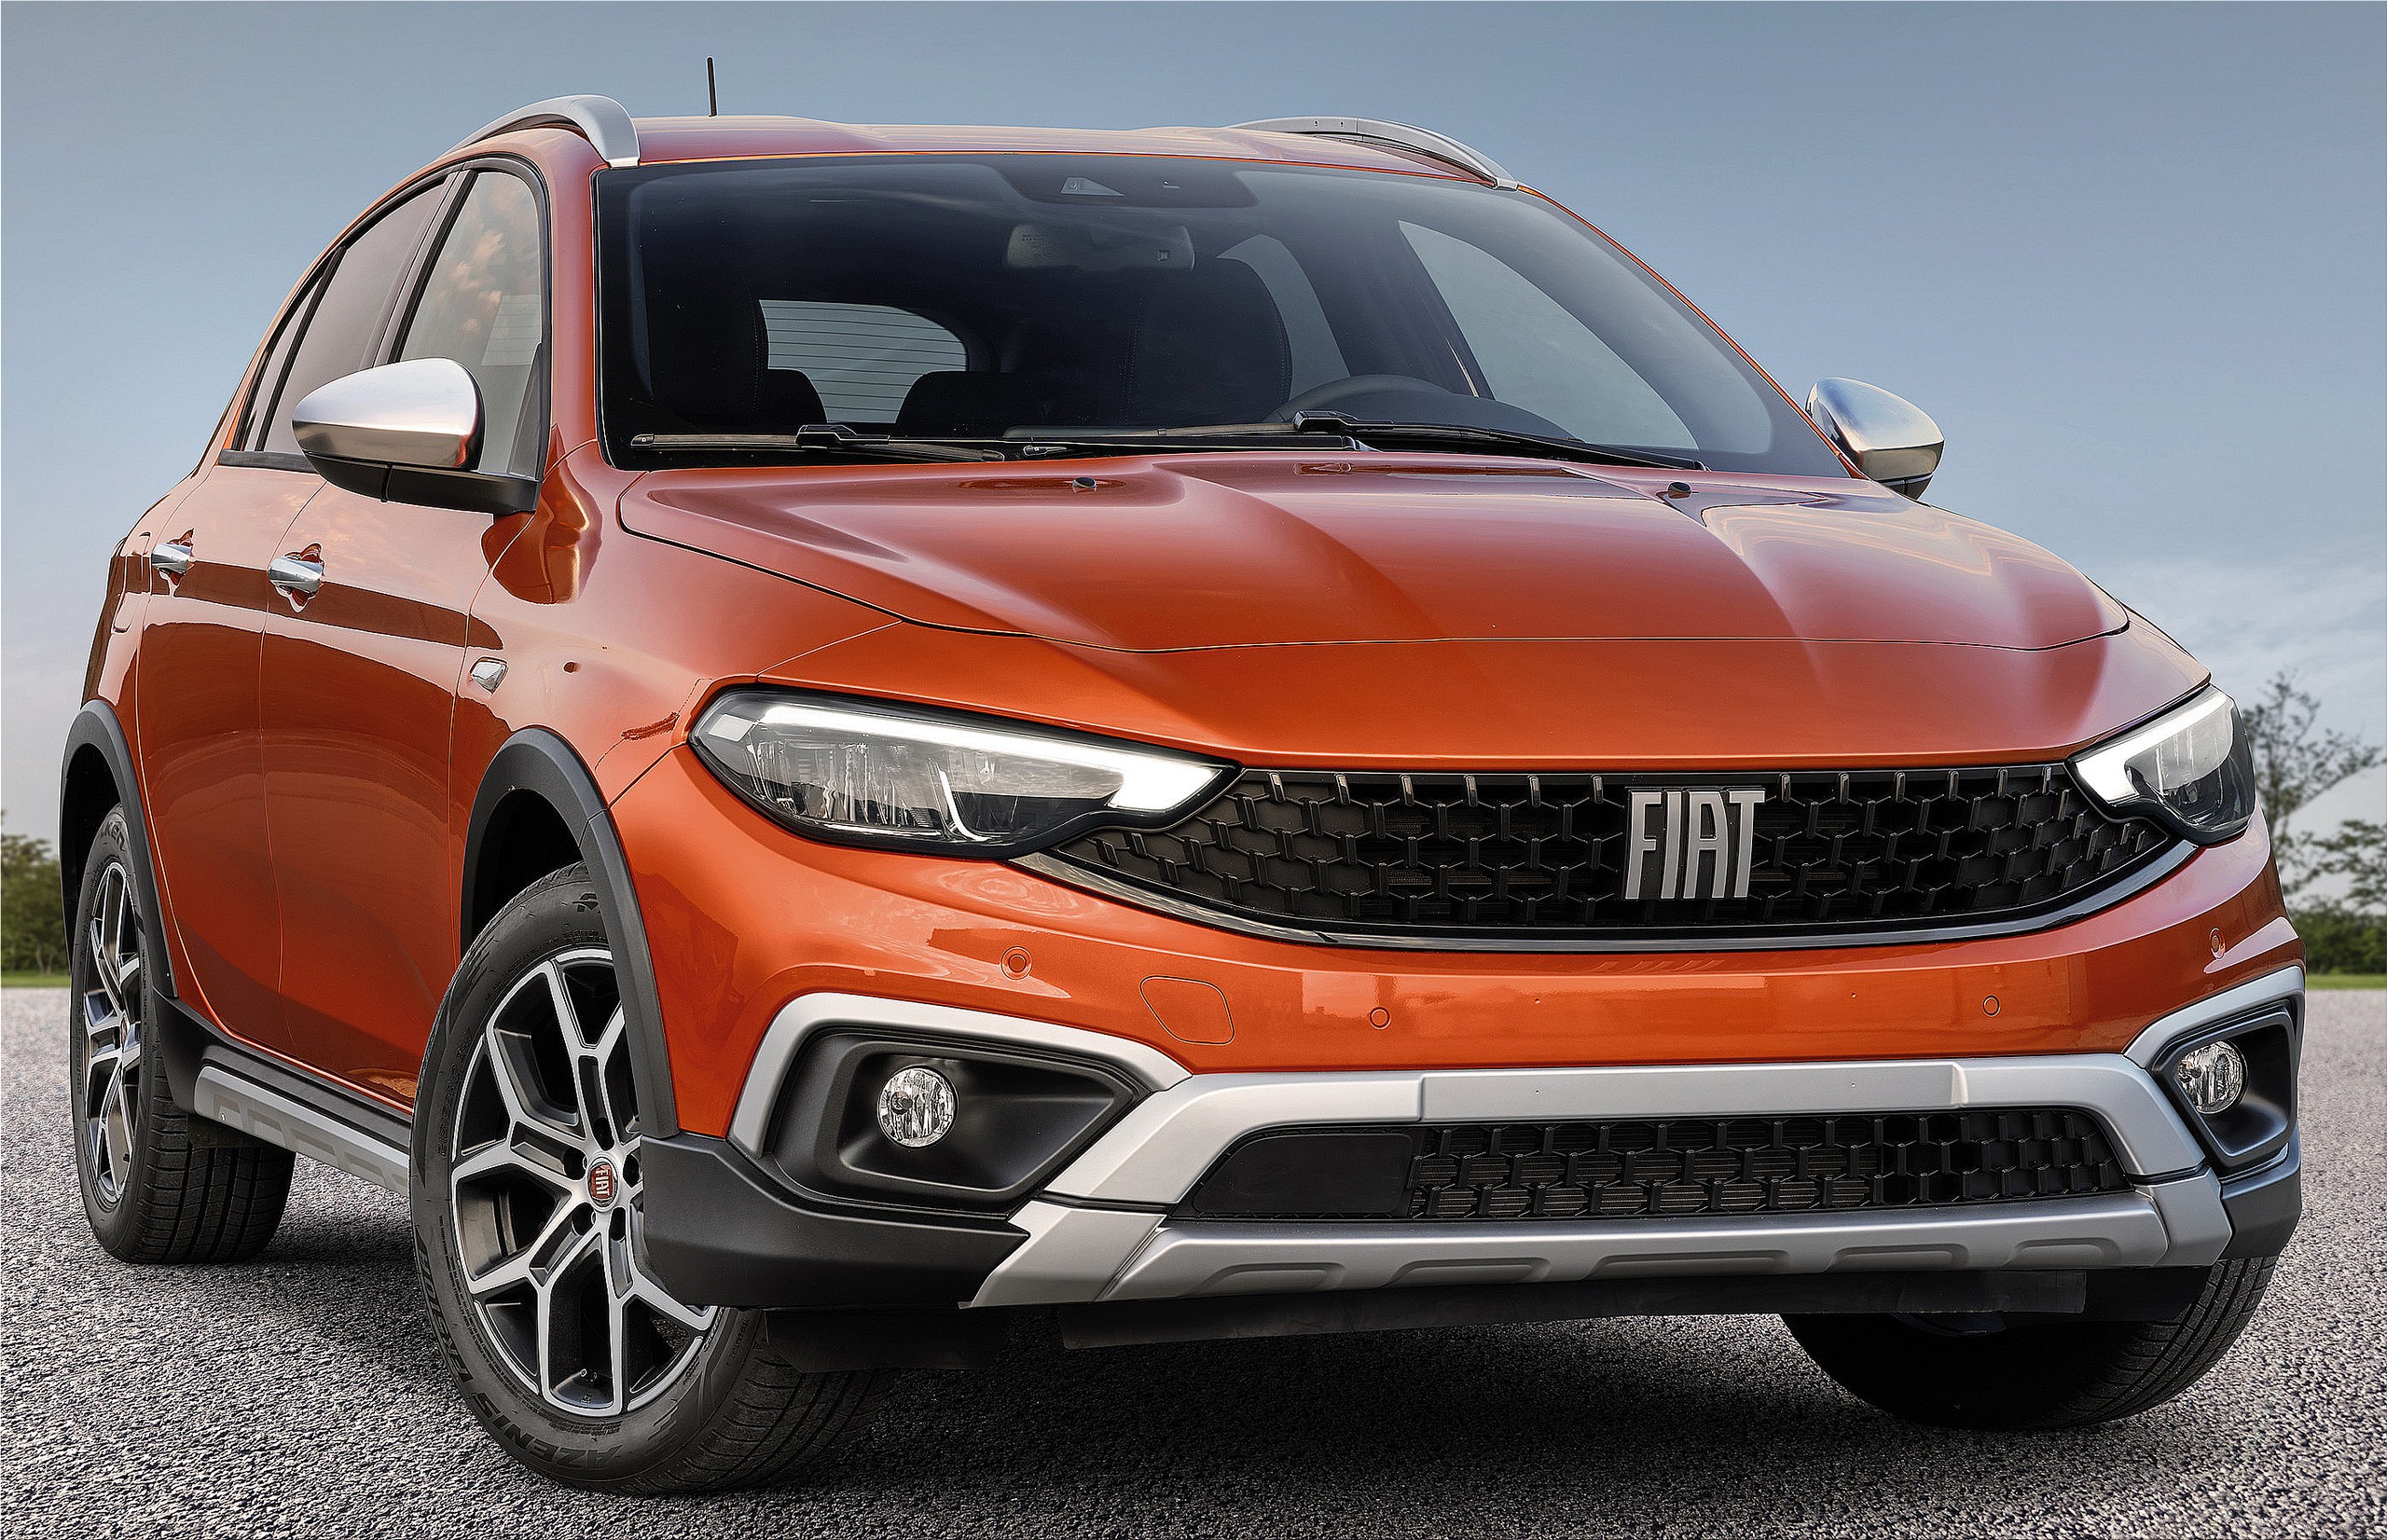 FIAT Opens Ordering For Its New Tipo City Sport In Europe